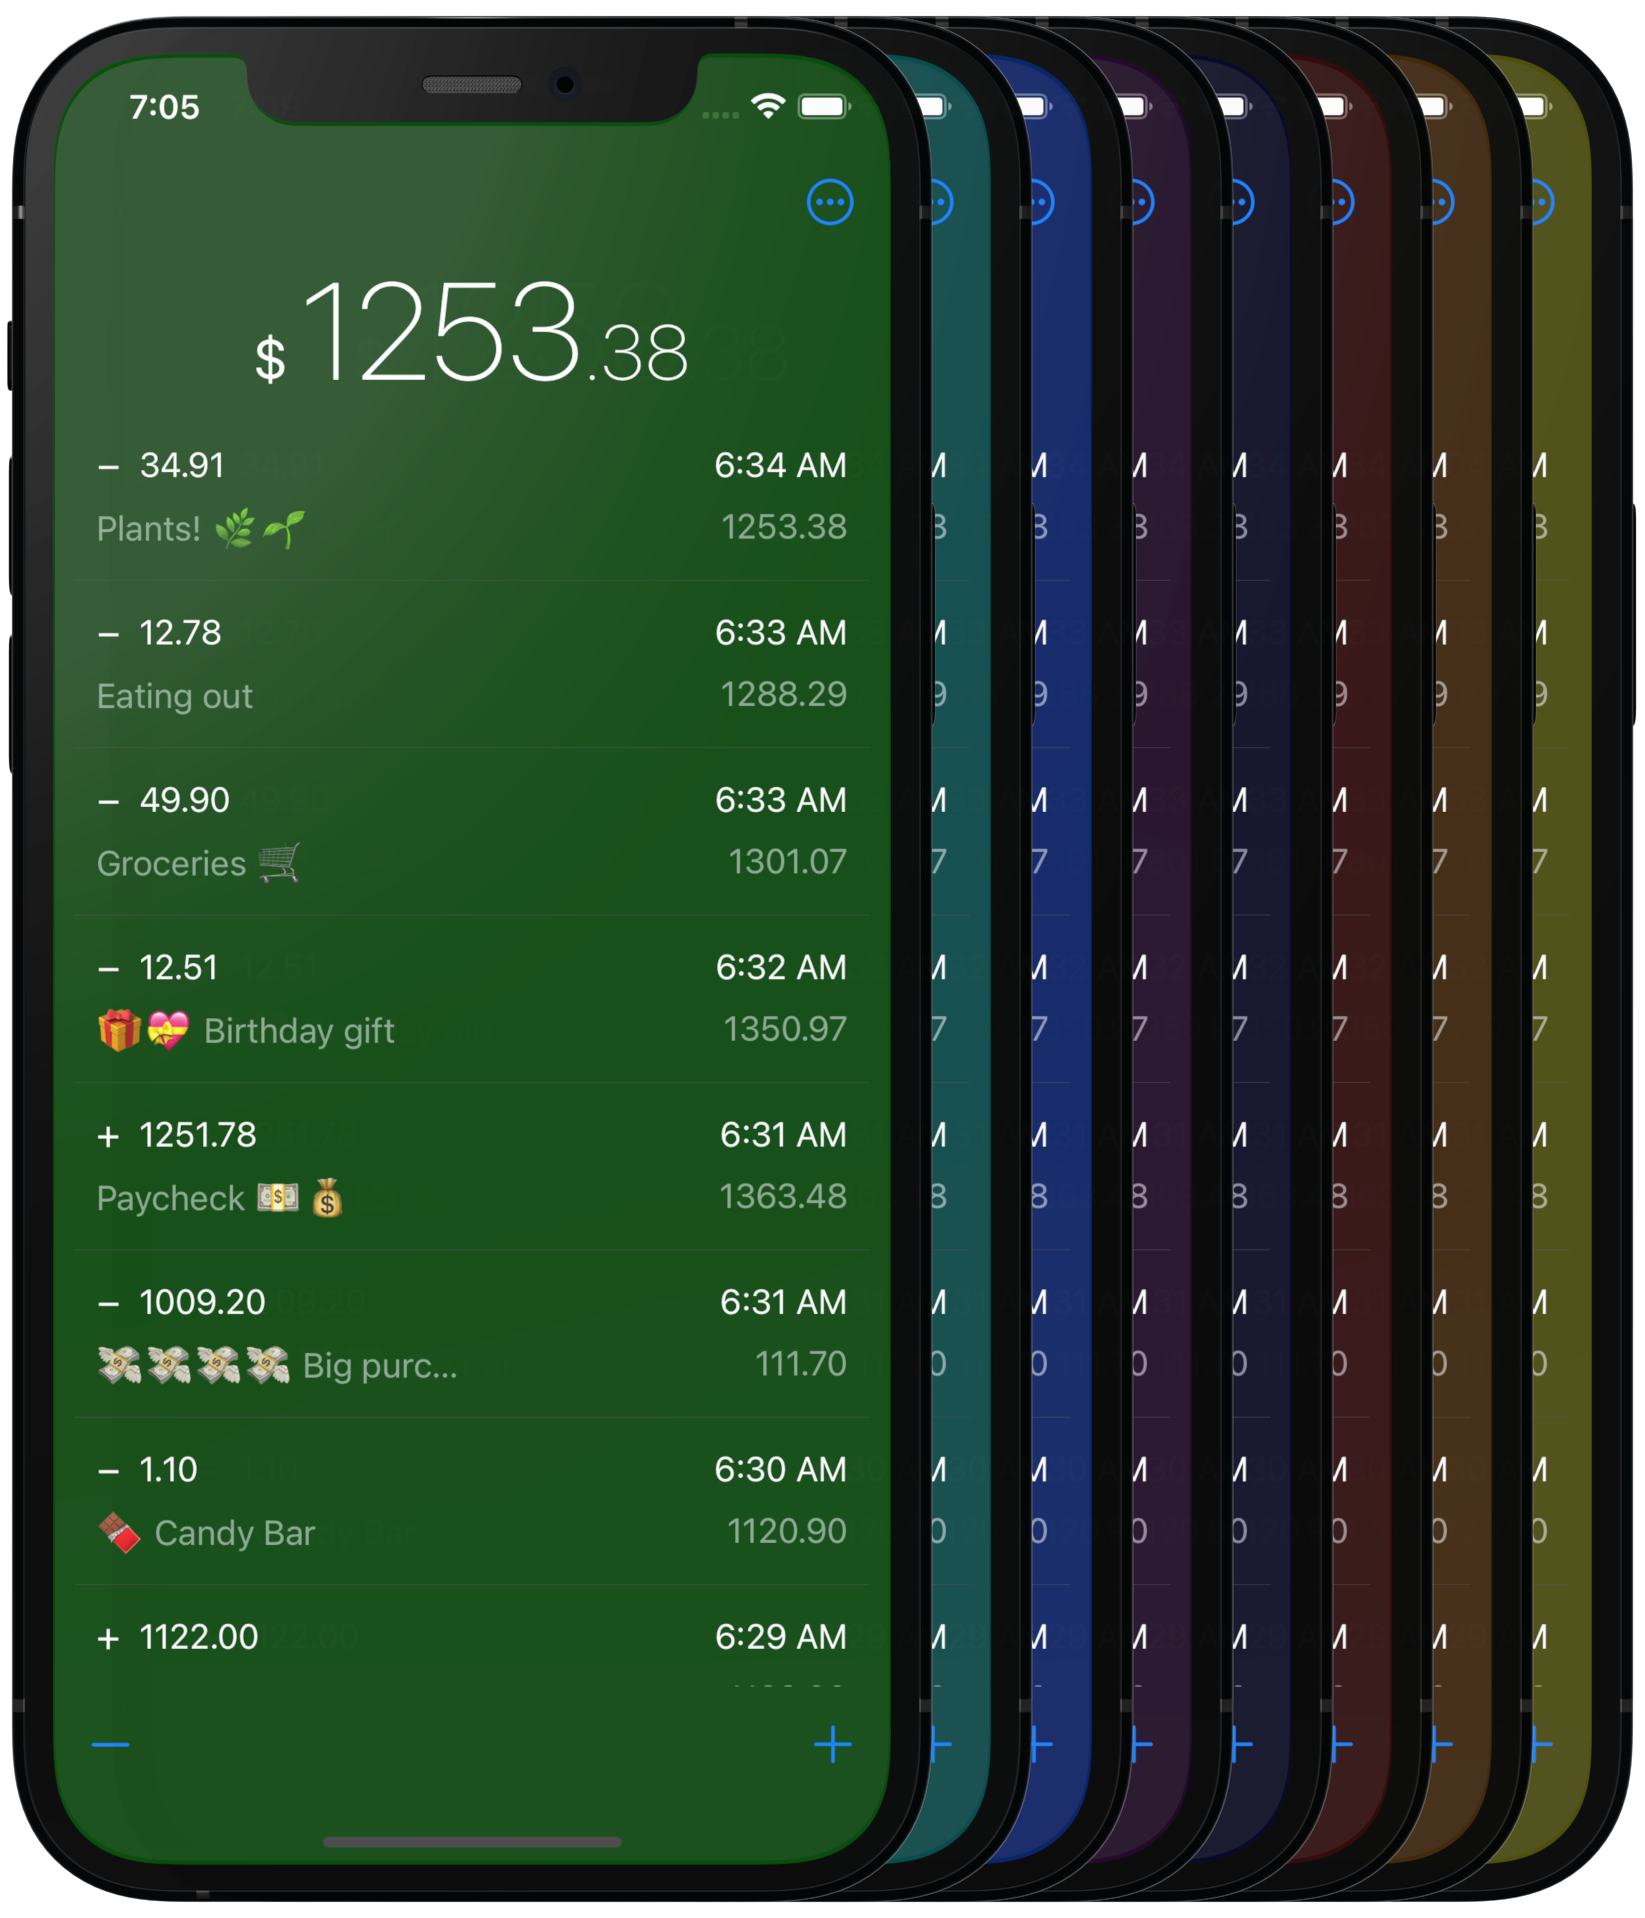 Multiple app snapshots stacked and offset. Each app snapshot in the stack has a different background color. Those colors from left to right: dark forest green, dark crimson red, dark turquoise, and a pastel yellow except a shadow is over it.